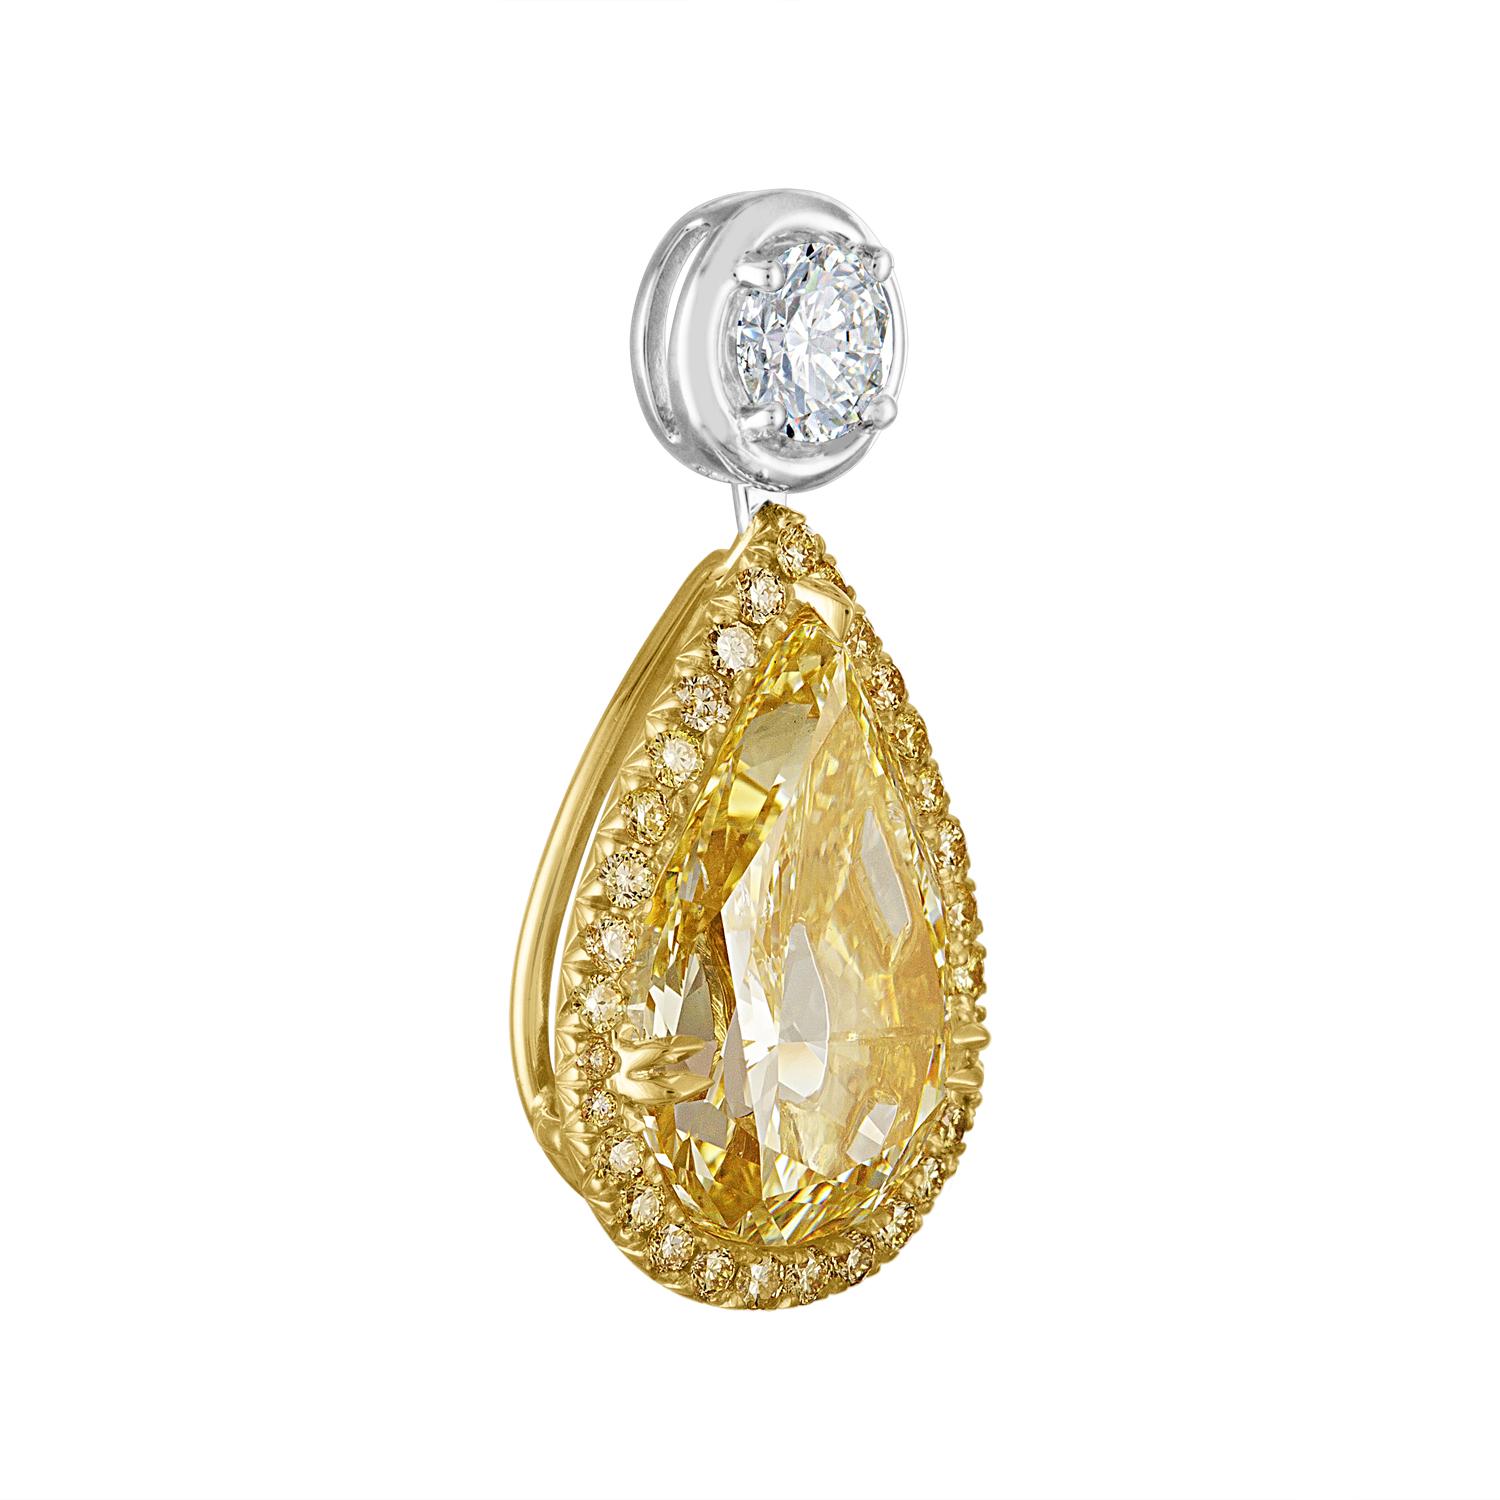 Contemporary GIA Certified 8.19 Carat Pear Shape Yellow Diamond in Two-Tone Mounting